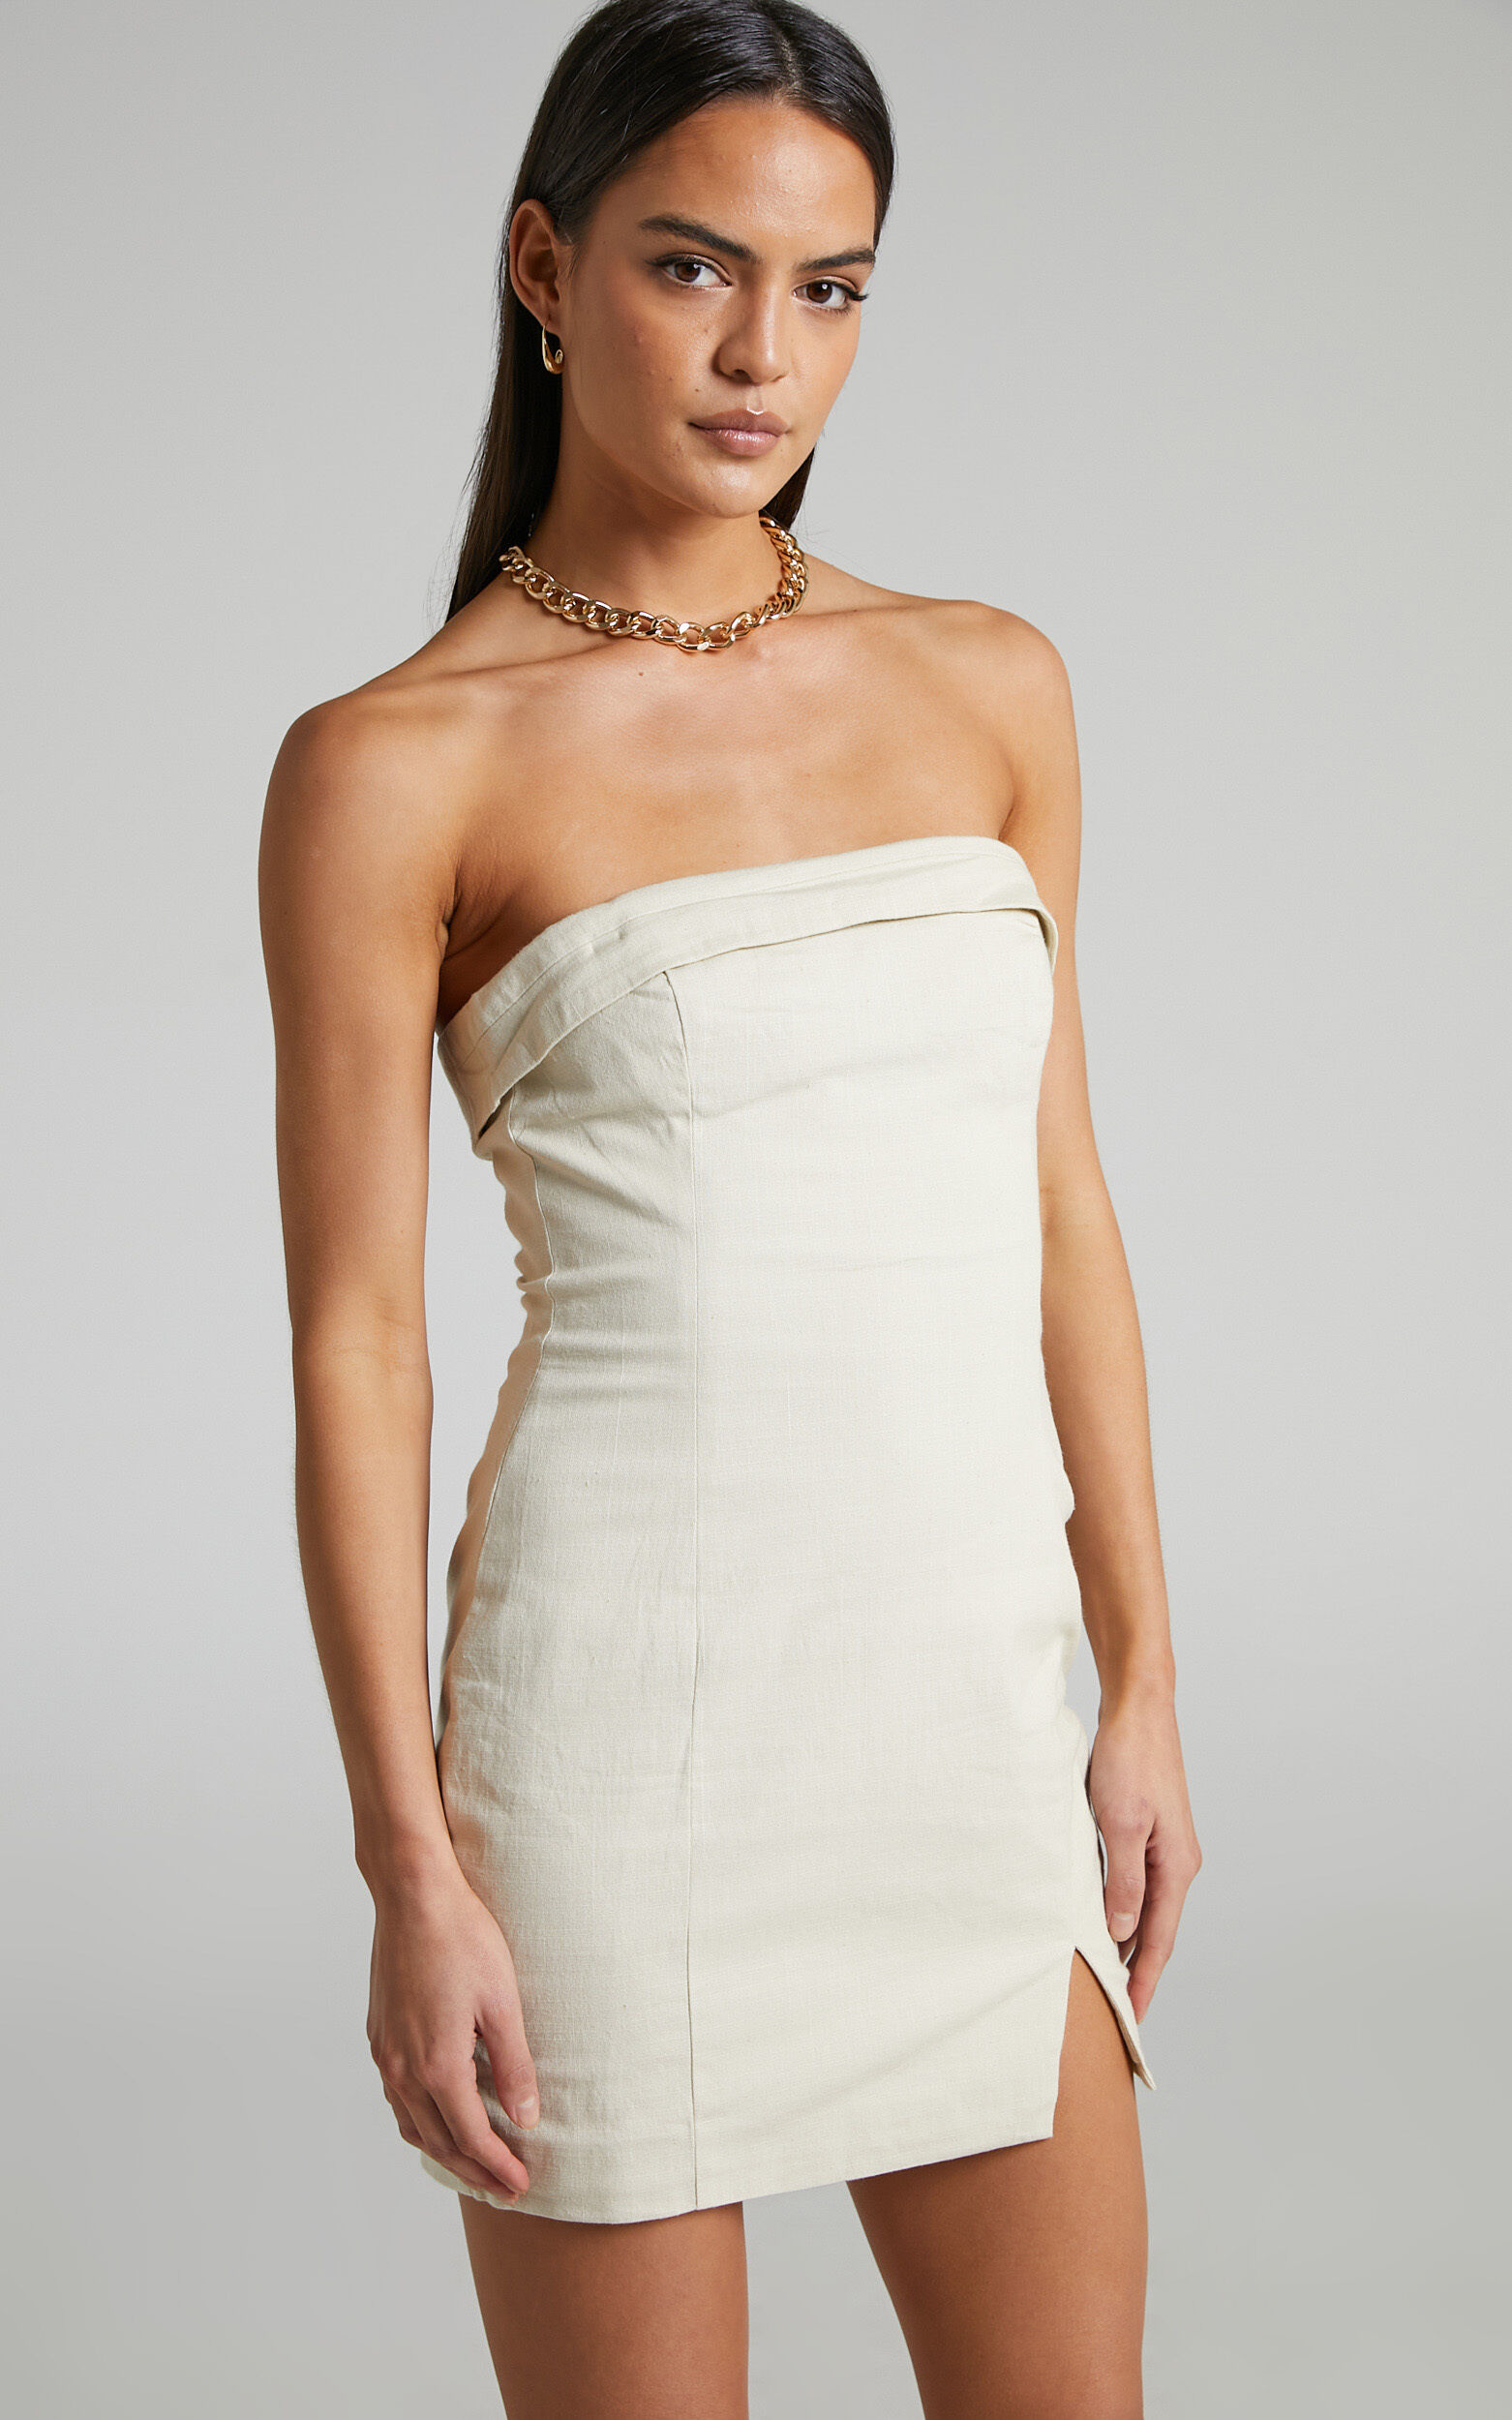 Runaway The Label - Crystal Strapless Mini Dress in Sand - L, BRN2, super-hi-res image number null